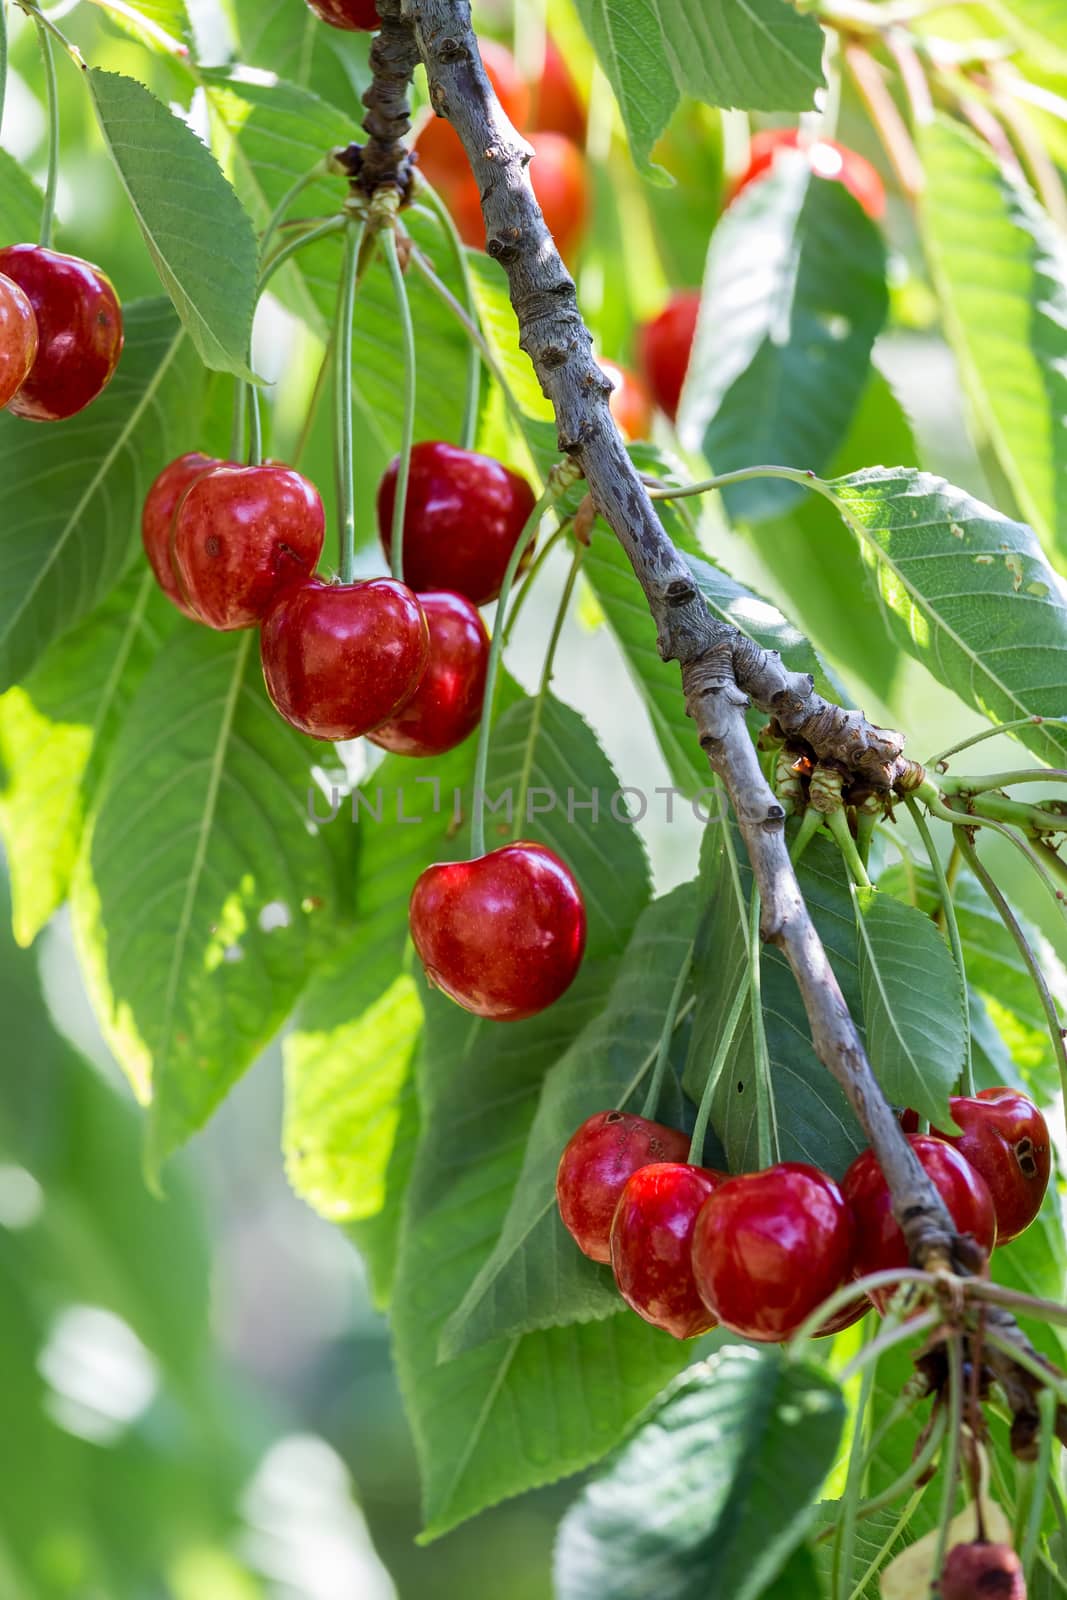 Red cherries in a tree by Digoarpi